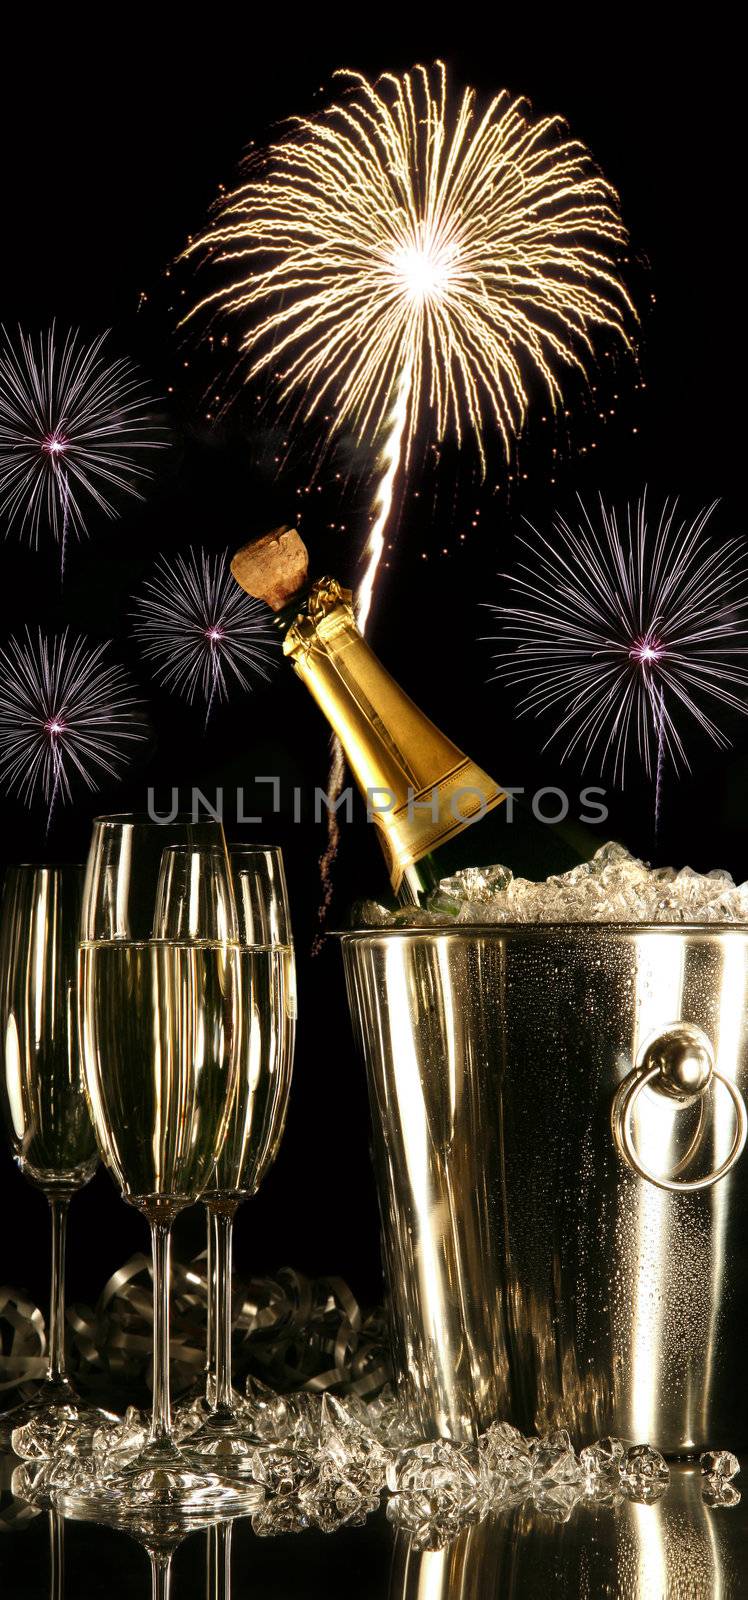 Glasses of champagne with fireworks by Sandralise